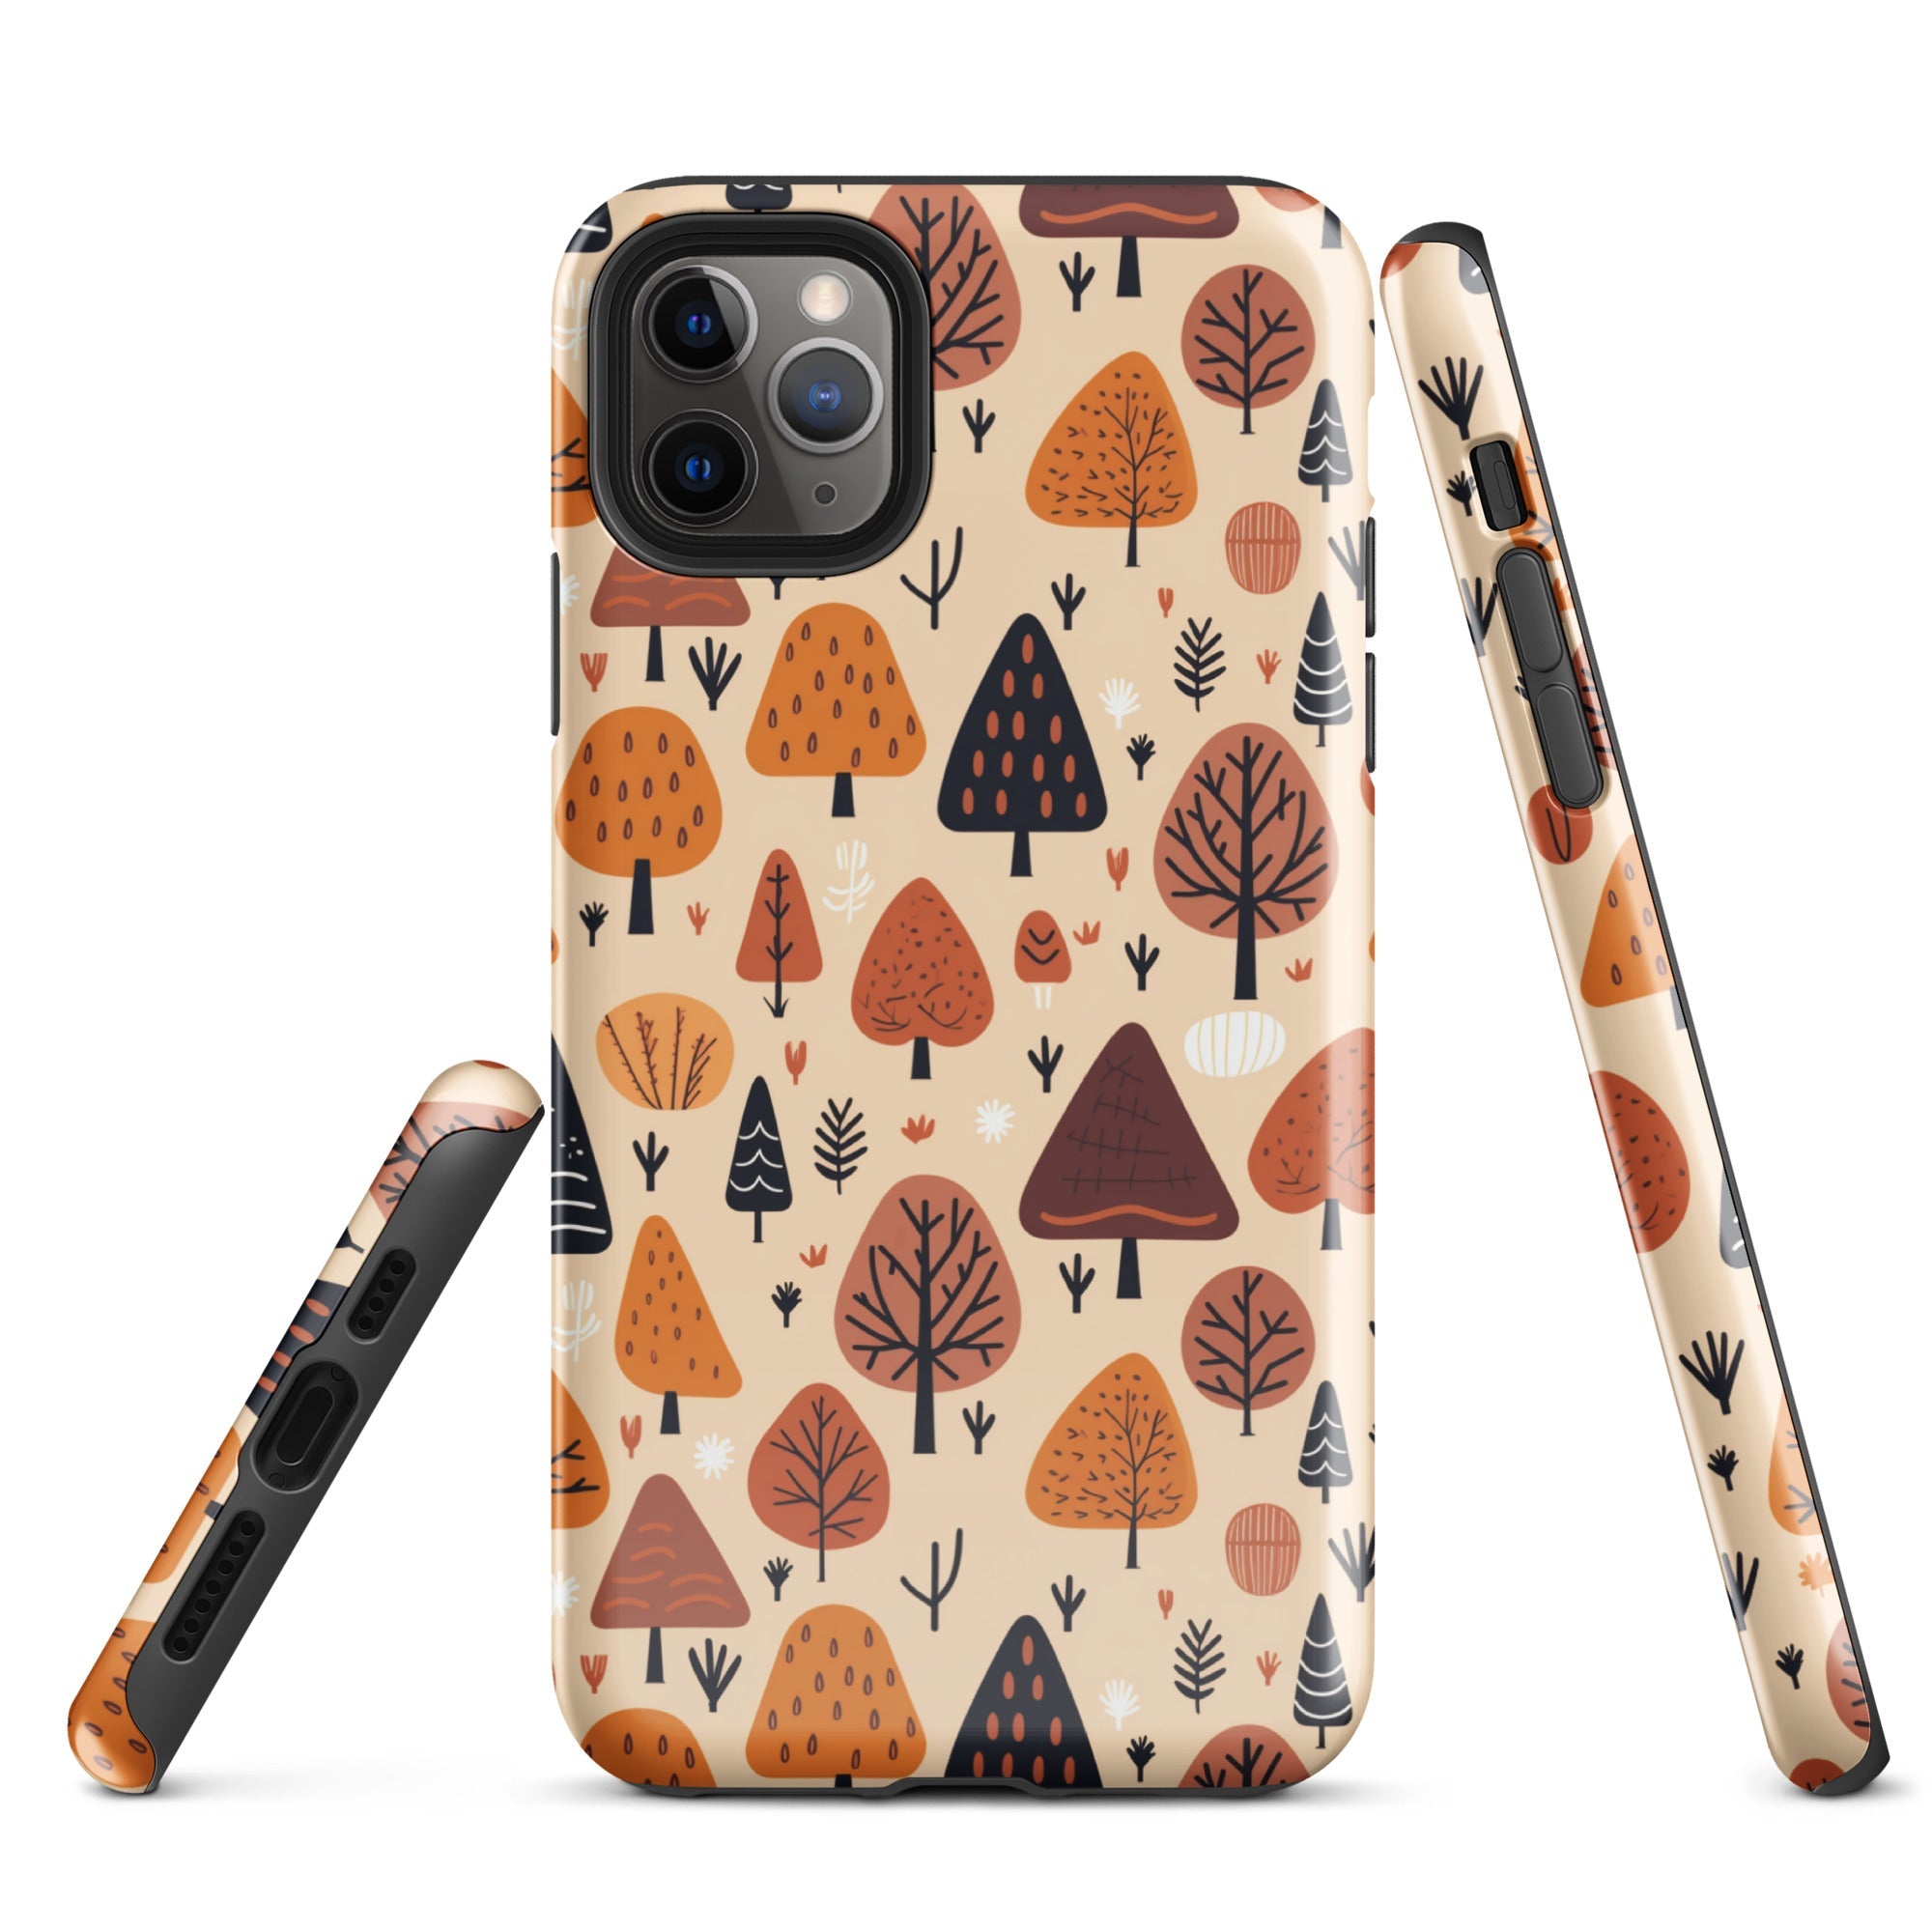 Terracotta Tree Tapestry - A Playful Autumn Mosaic - iPhone Case - Pattern Symphony